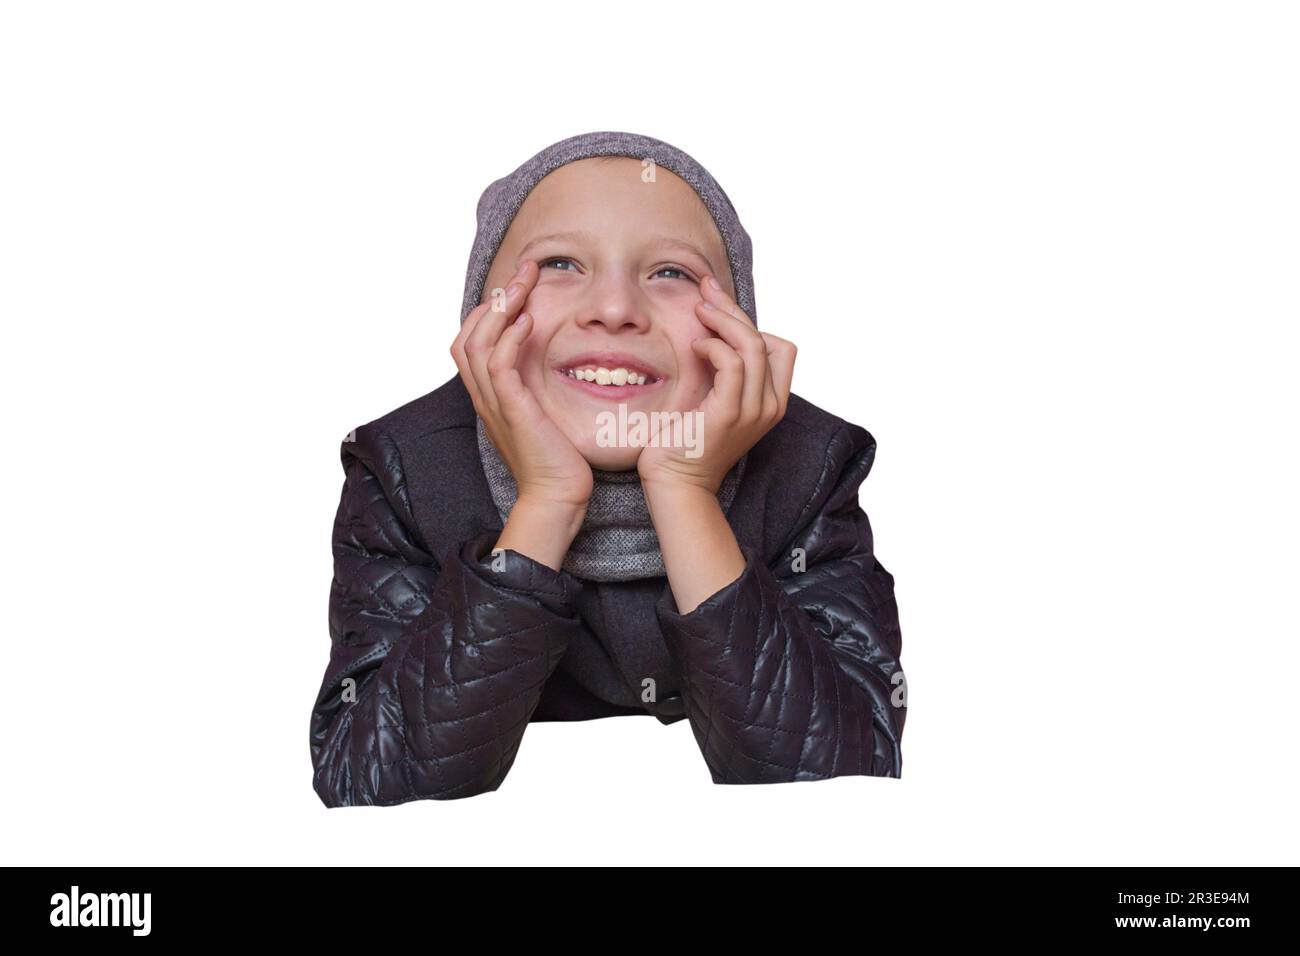 laughing boy in autumn clothes supports his face with his hands Stock Photo